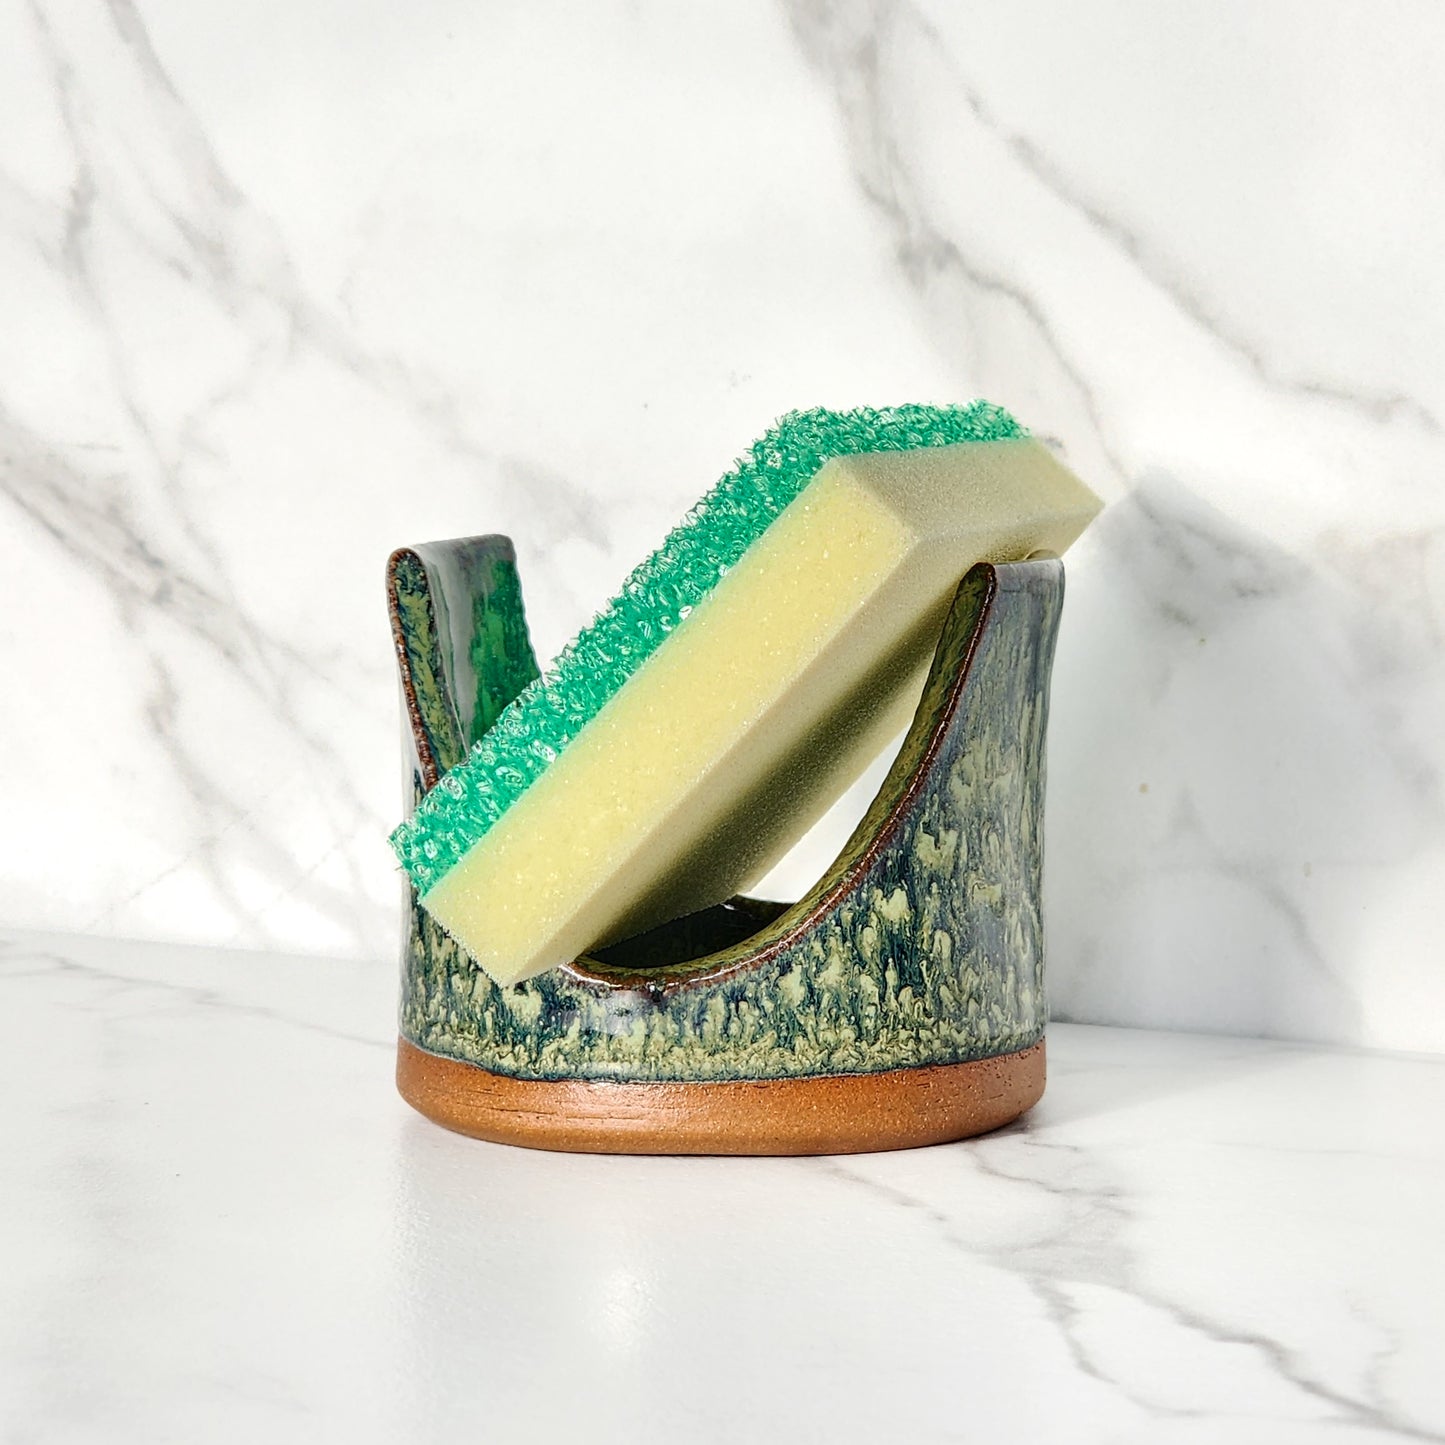 Image: Clinton Pottery's Handmade Sponge Holder in Froggy Bottom – A whimsical and practical kitchen accessory, expertly crafted by artisans. This durable stoneware holder, in playful Froggy Bottom, adds a touch of lighthearted charm to your kitchen, reminiscent of outdoor adventures and cheerful nature. Designed to securely hold your sponge and prevent water spread, it keeps your counters and sink area tidy. 